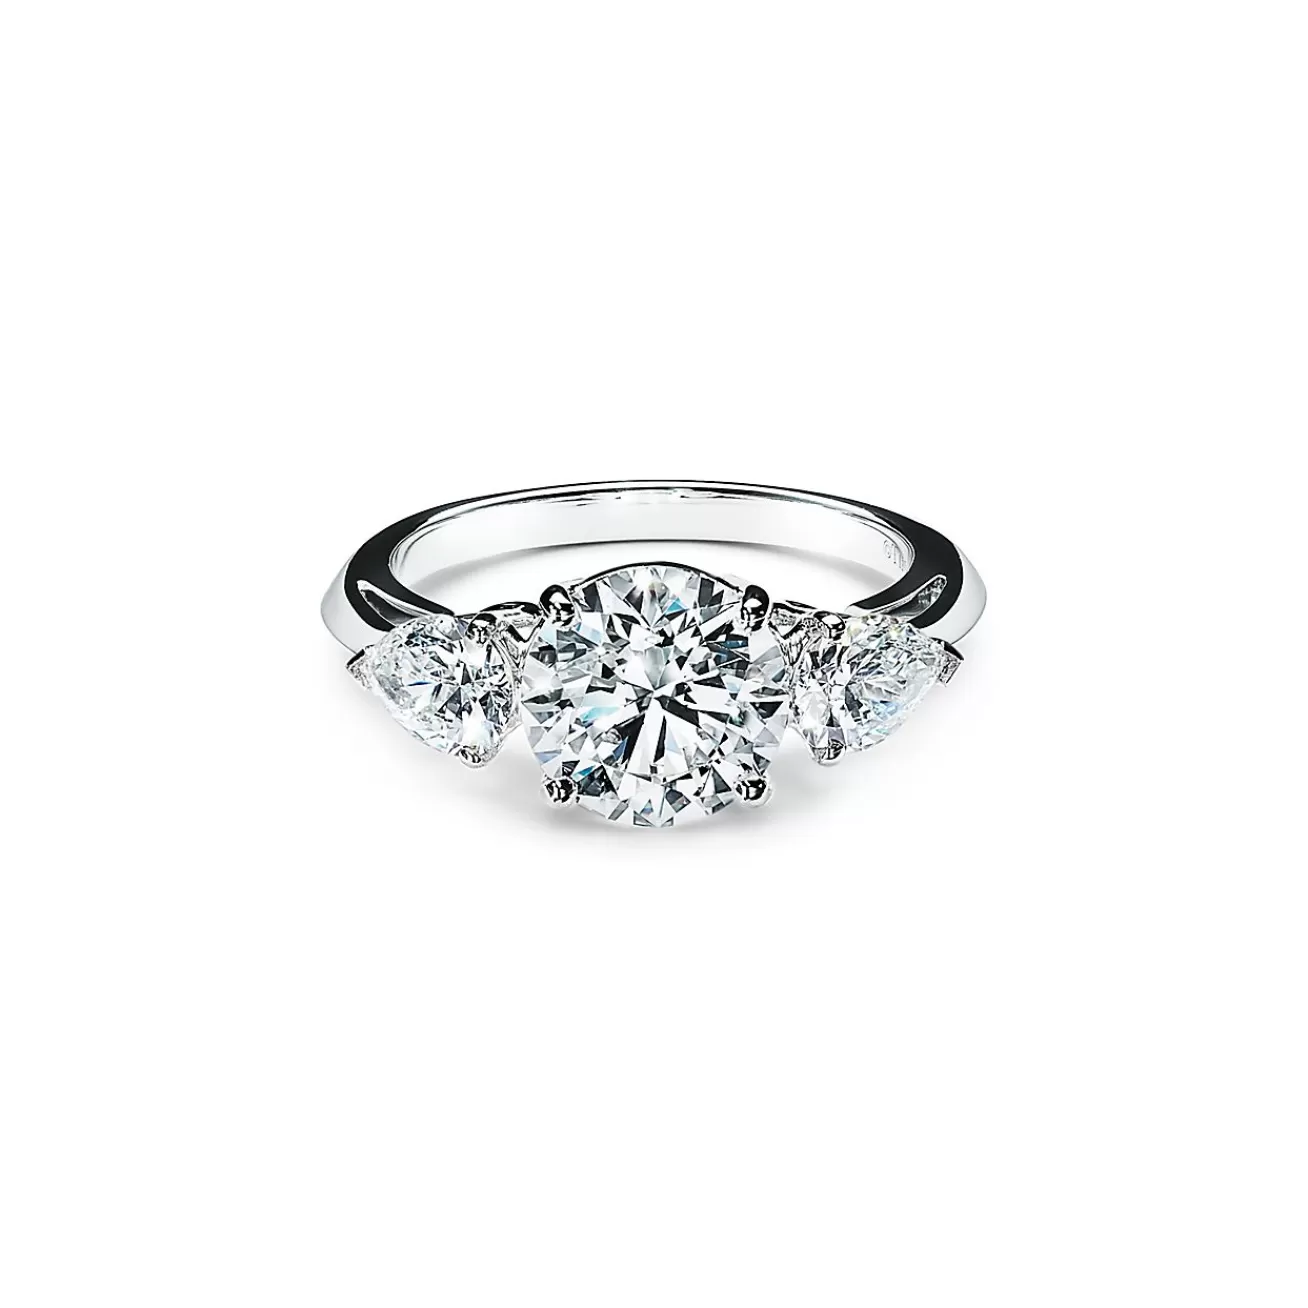 Tiffany & Co. Tiffany Three Stone engagement ring with pear-shaped side stones in platinum. | ^ Engagement Rings